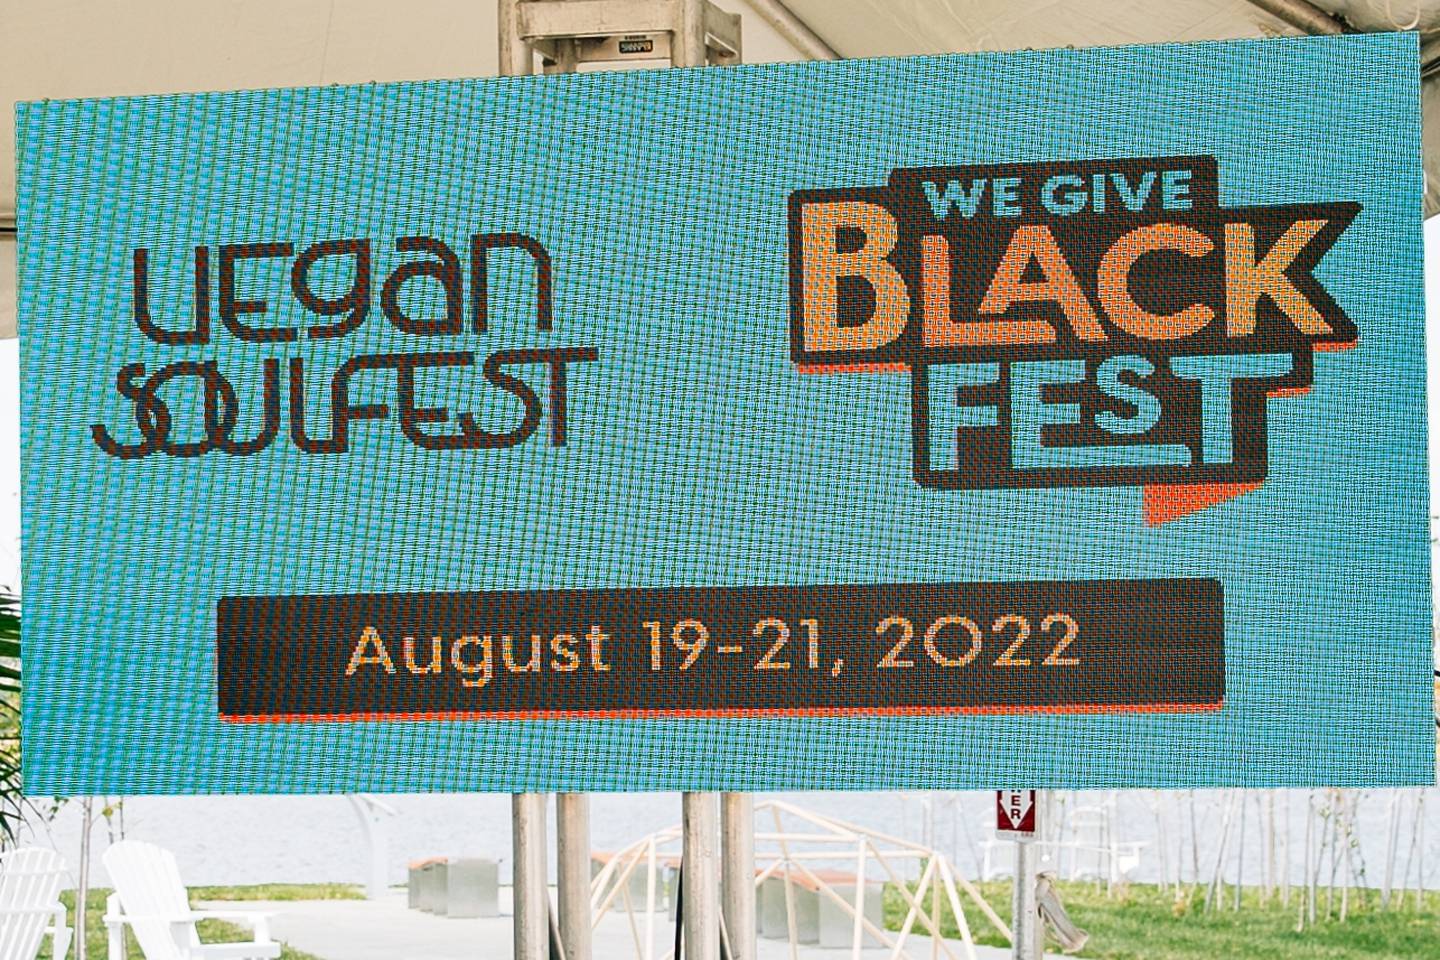 Vegan SoulFest and CLLCTIVLY's We Give Black Fest joined for a three-day festival in 2022.